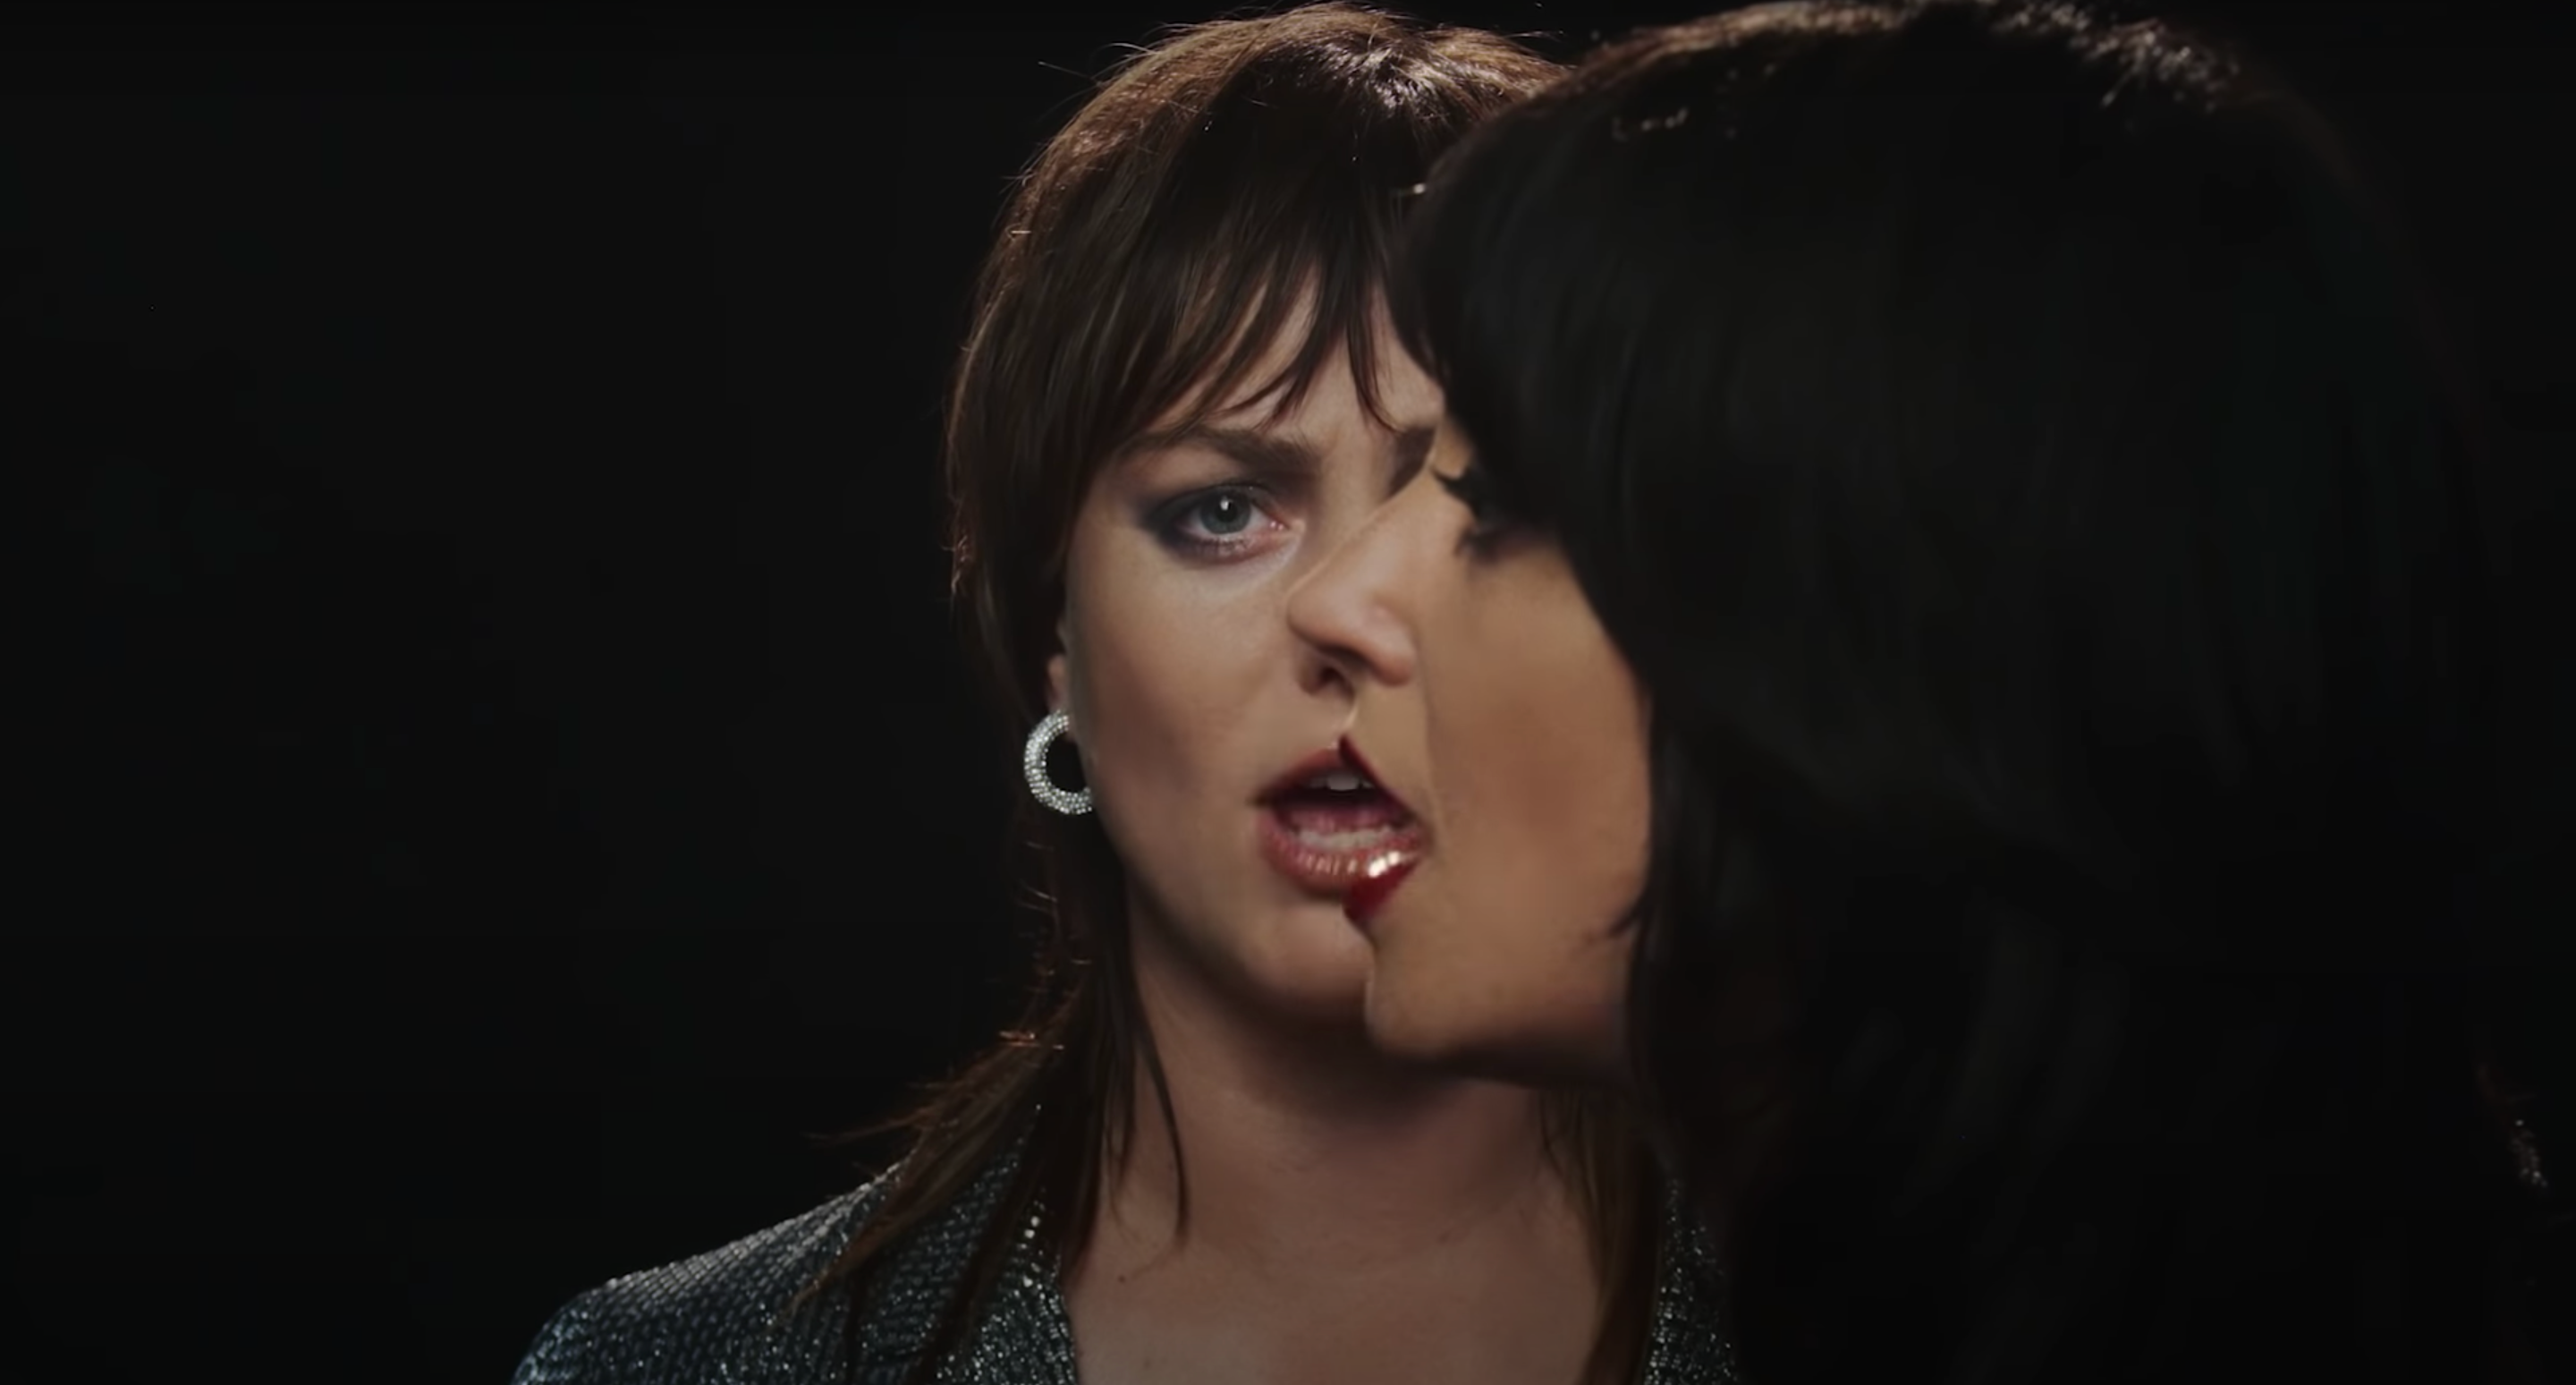 Angel Olsen and Sharon Van Etten join forces for "Like I Used To"